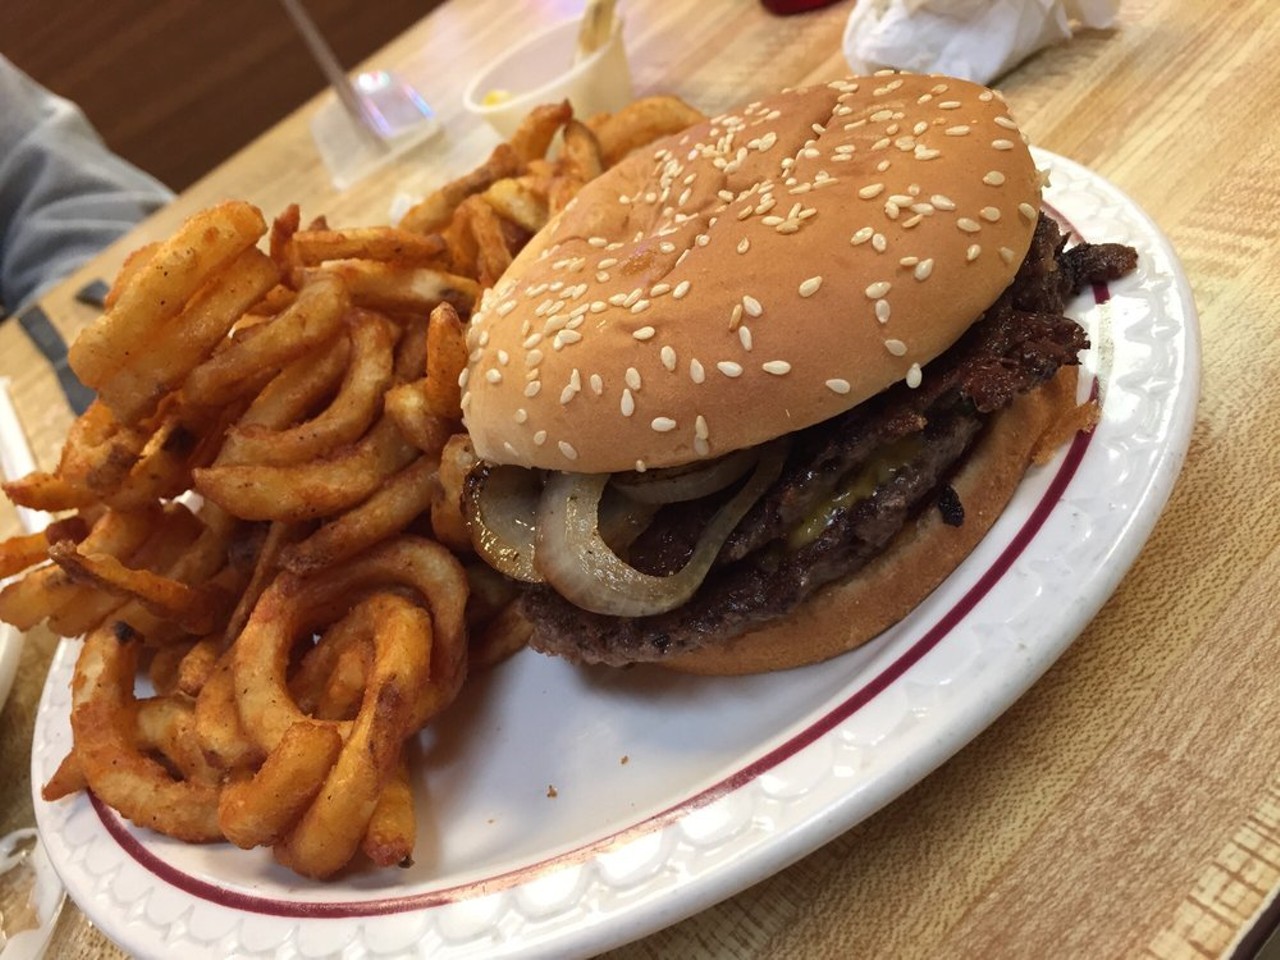 #9: Chuck A Burger Drive-In
(9025 St Charles Rock Road; 314-427-9524)
Find out what Yelpers think of Chuck A Burger Drive-In here.
Photo credit: Jason P. via Yelp